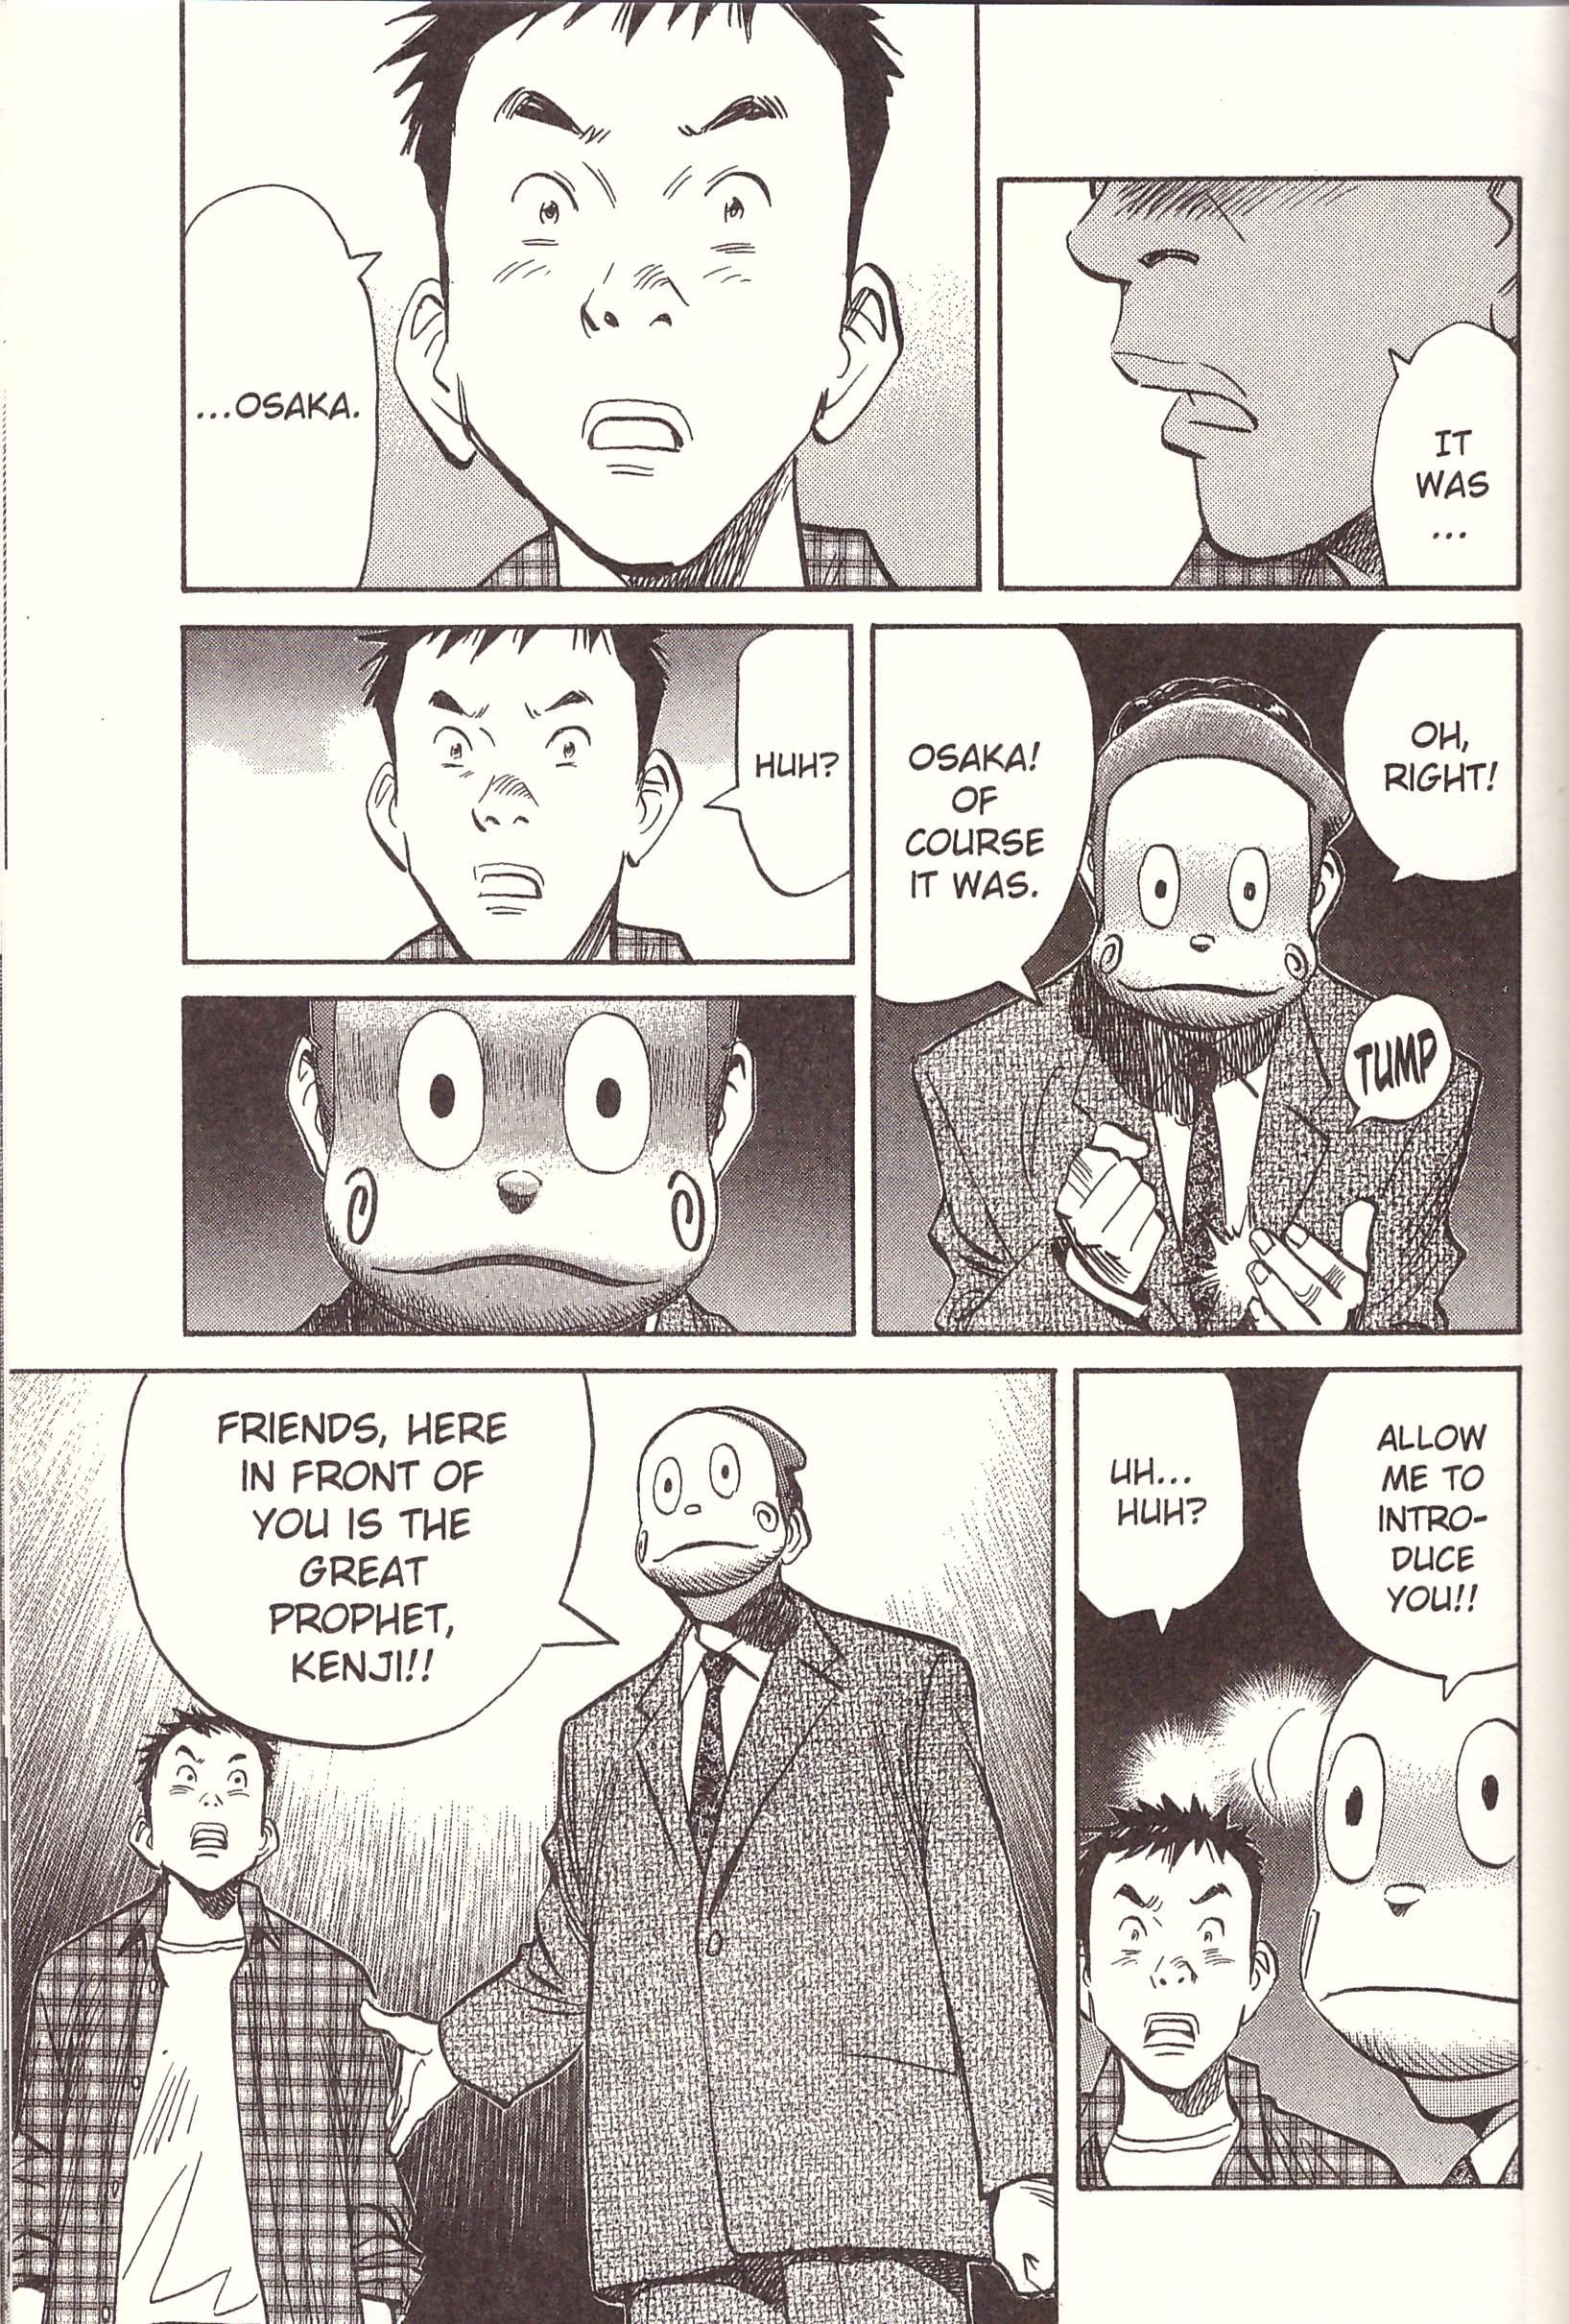 20th Century Boys 03 review